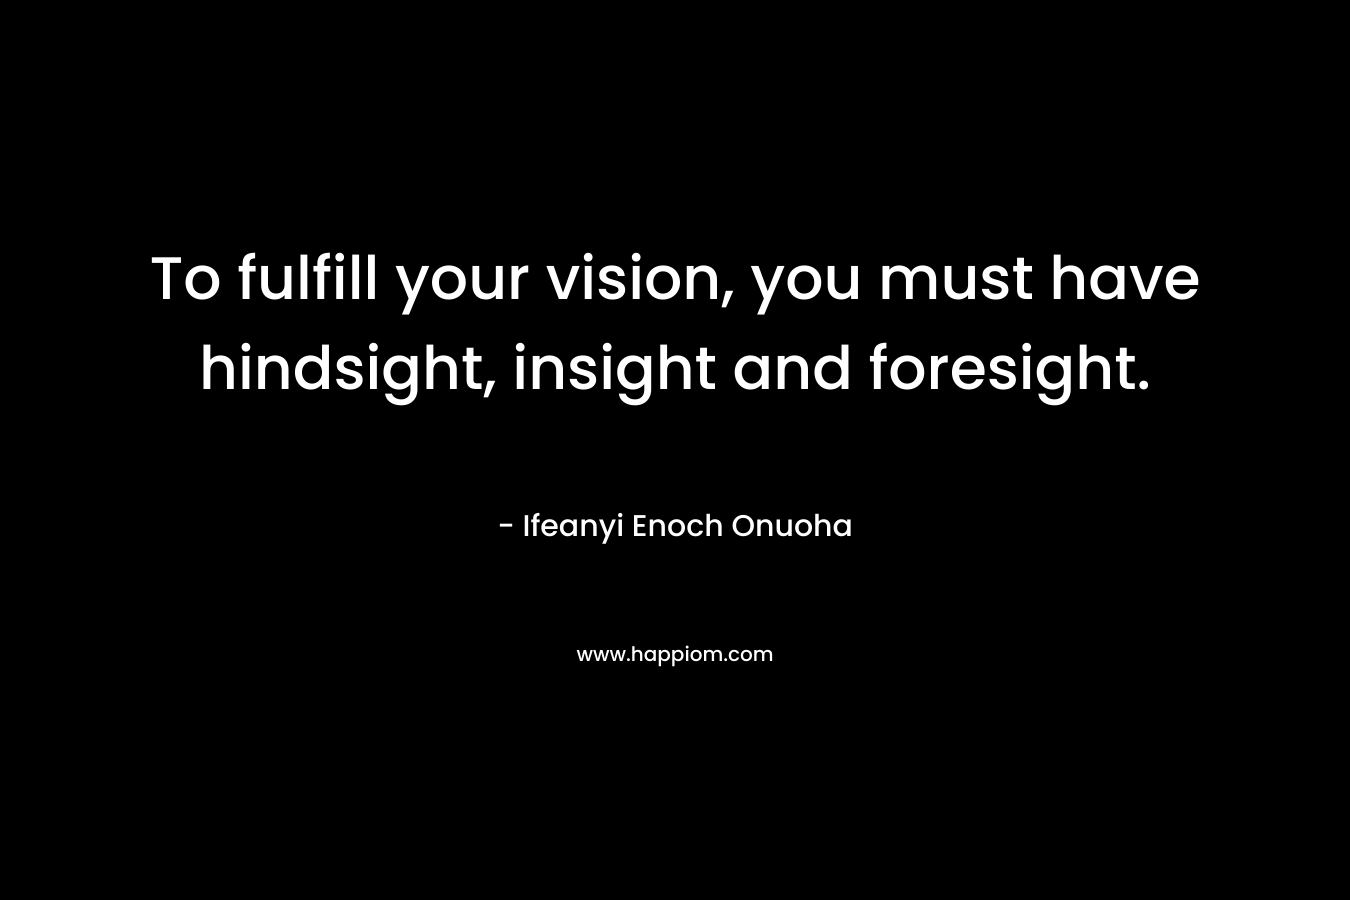 To fulfill your vision, you must have hindsight, insight and foresight.